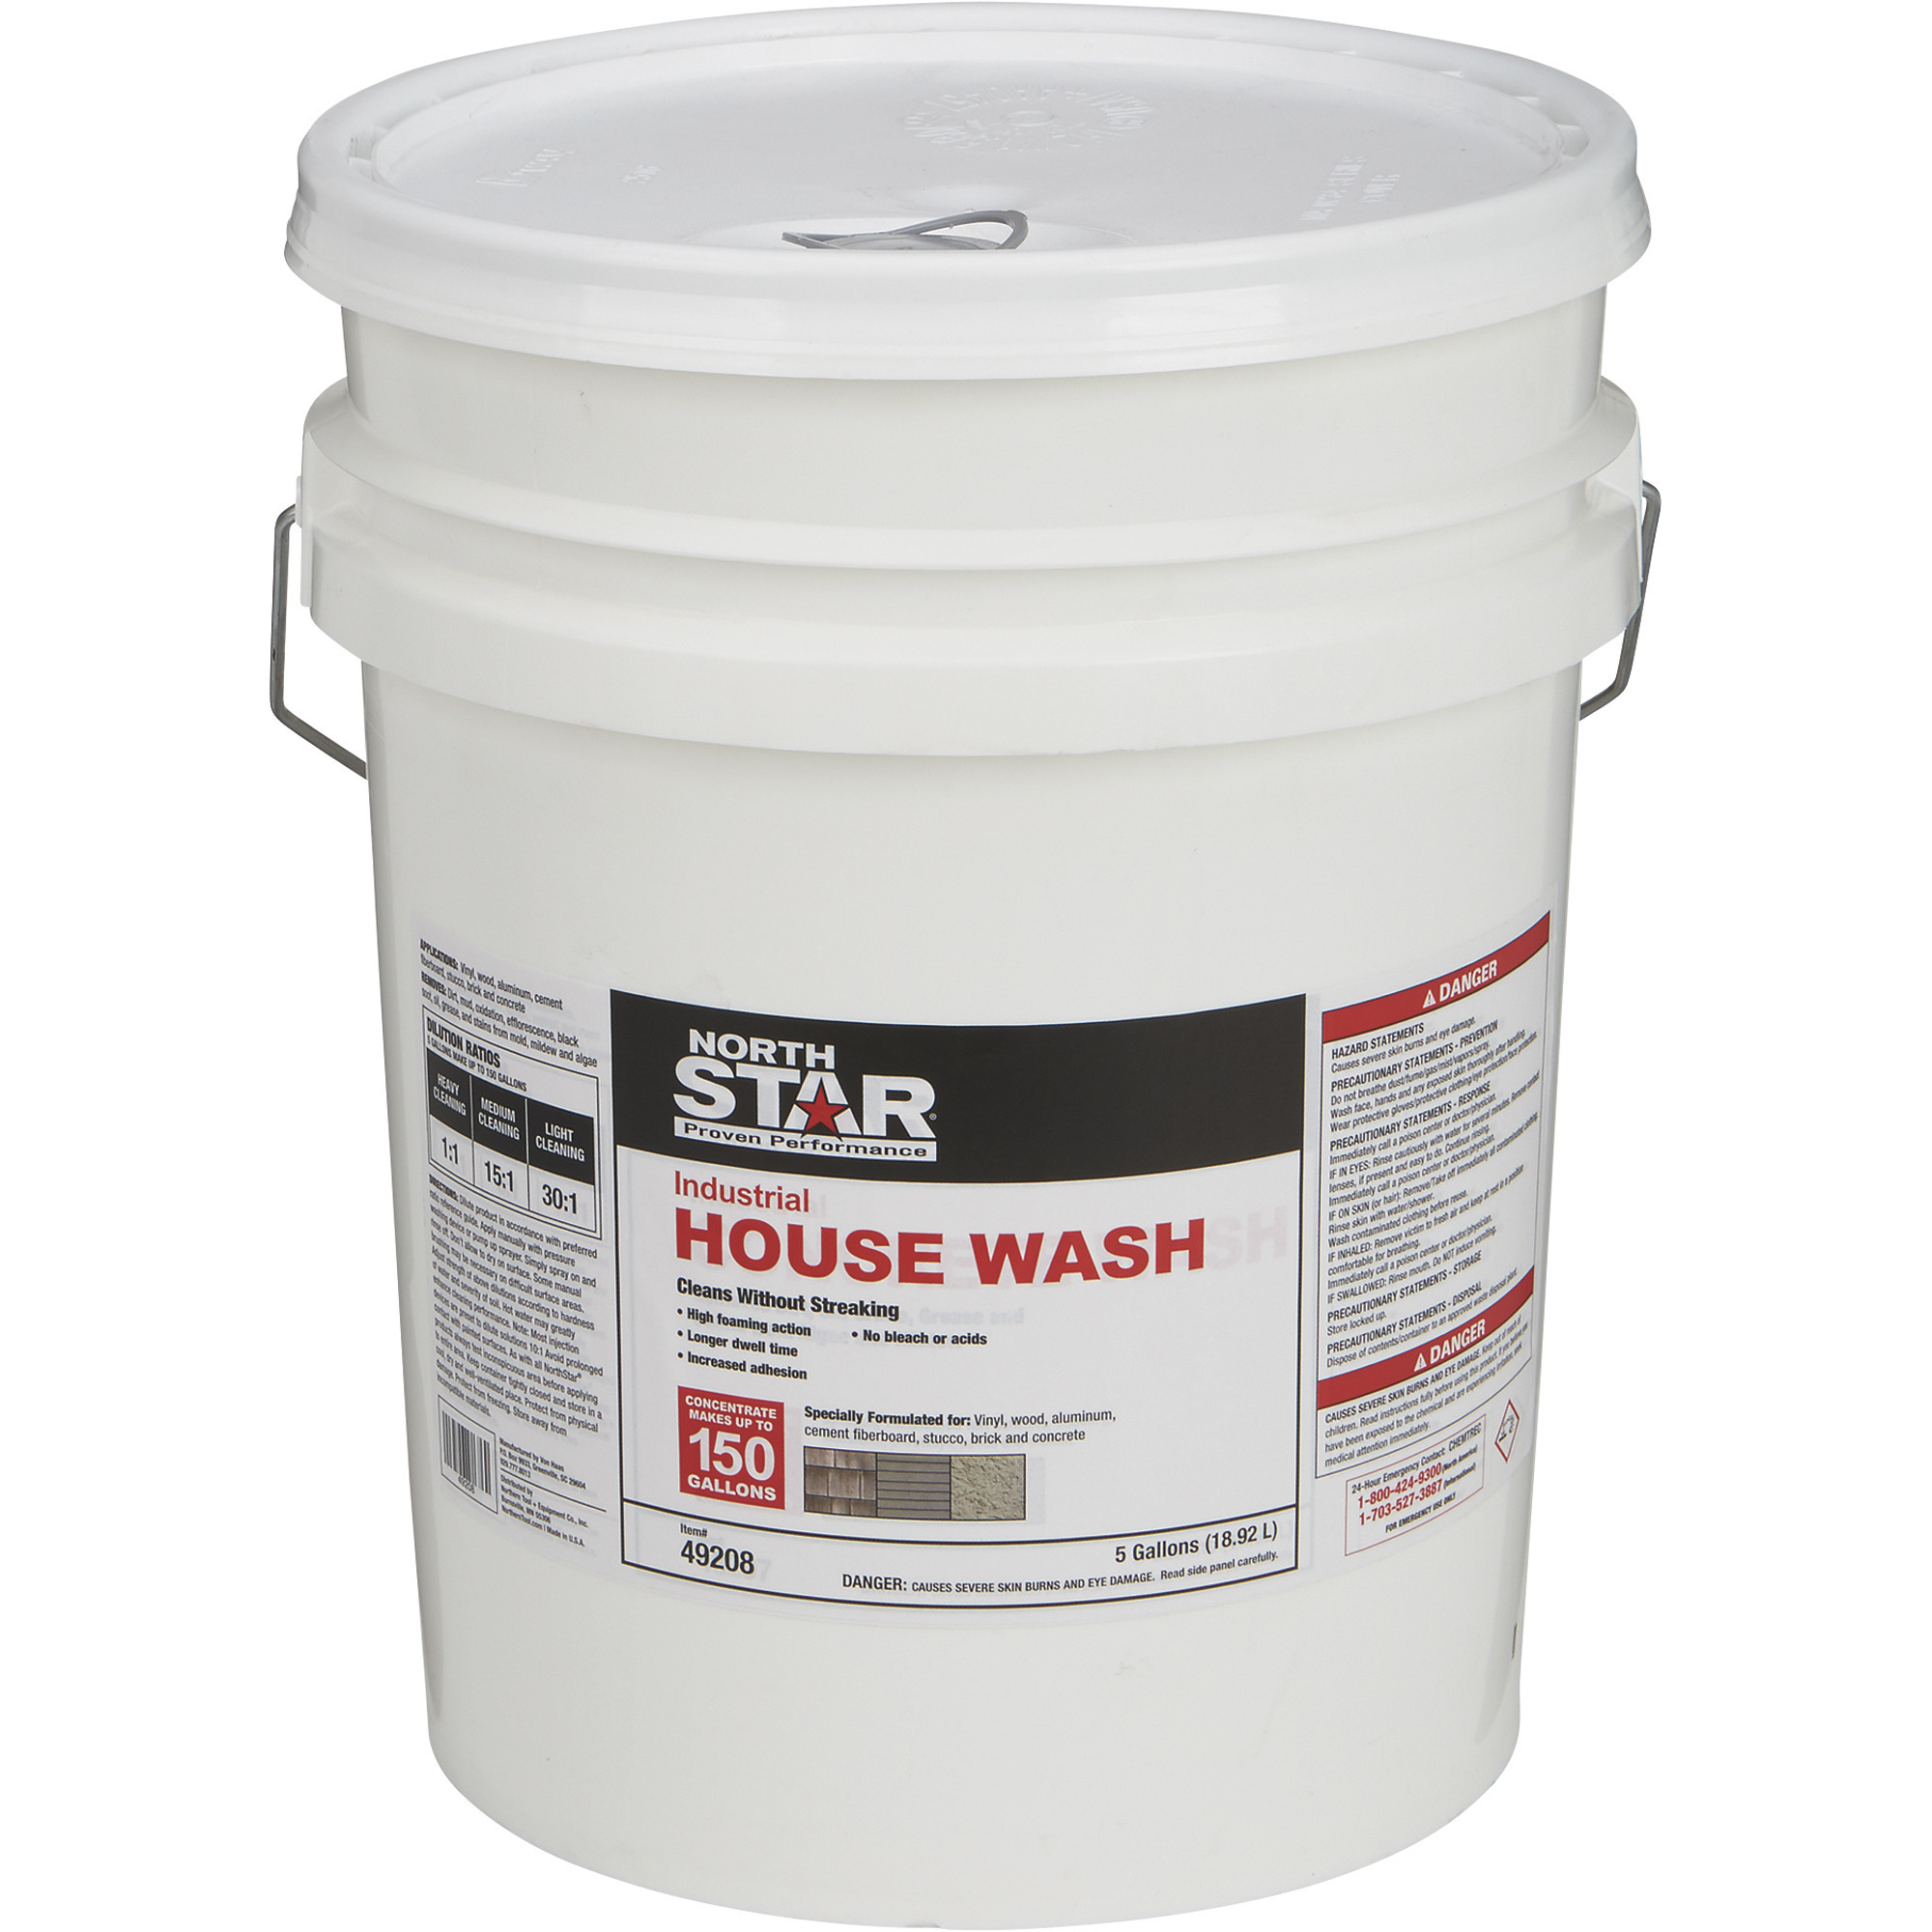 NorthStar Pressure Washer High-Performance House Wash Concentrate â 5-Gallons, Model NSHW5